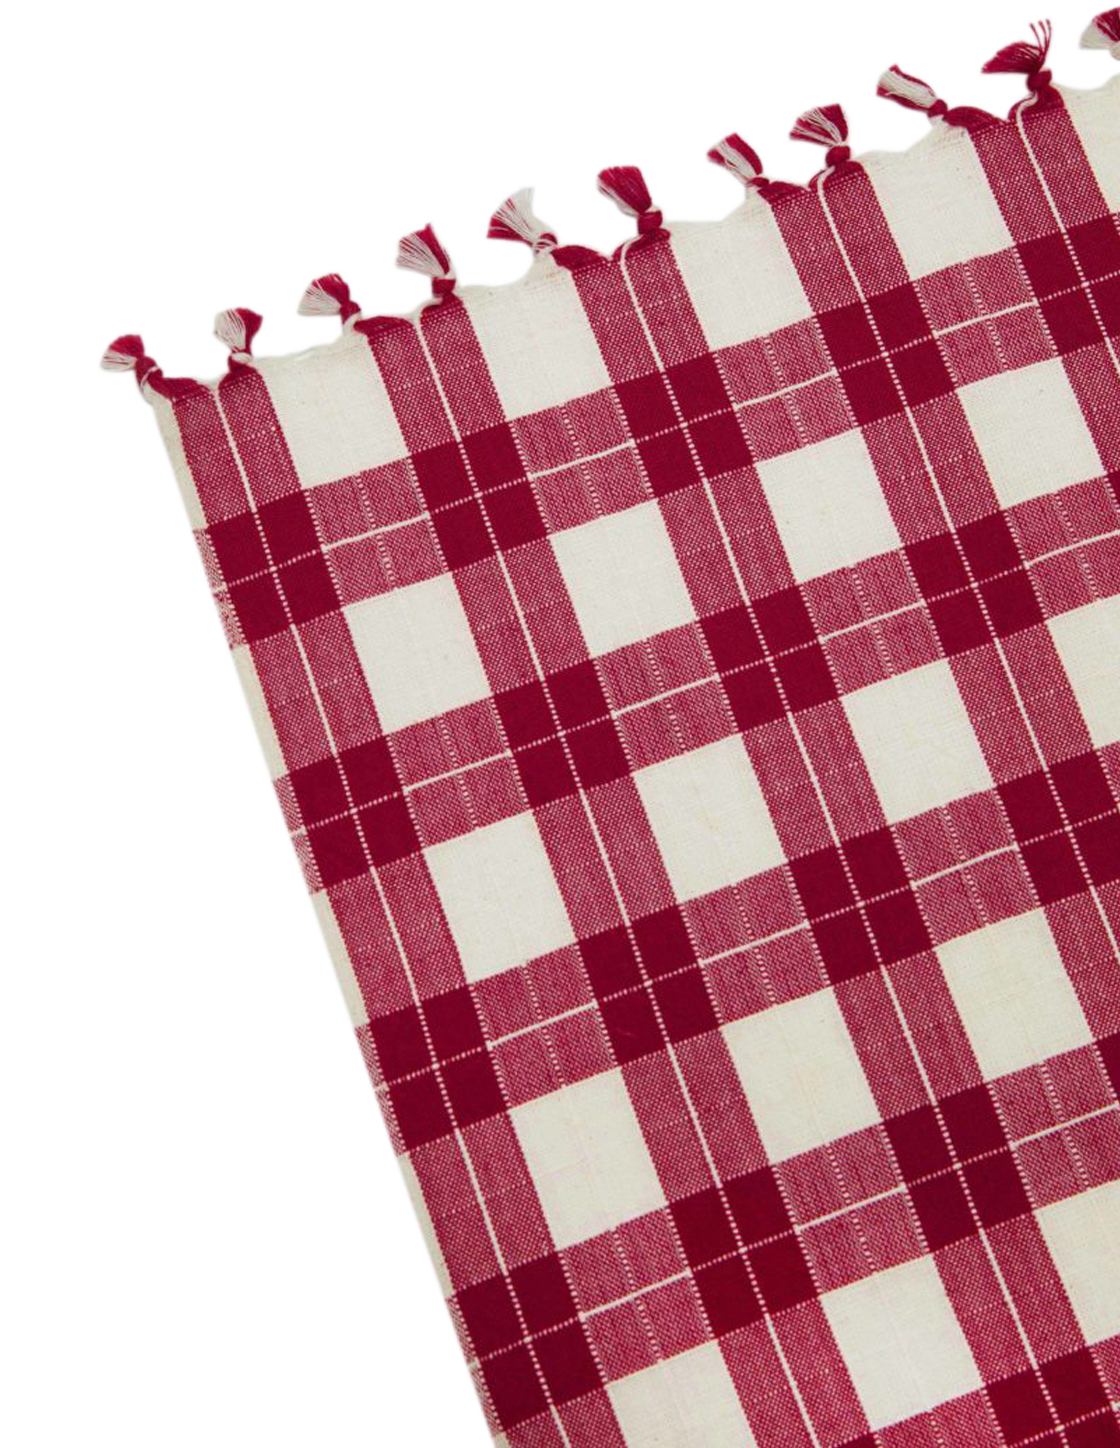 The Bells Six – Plaid Red Tablecloth Annabelle